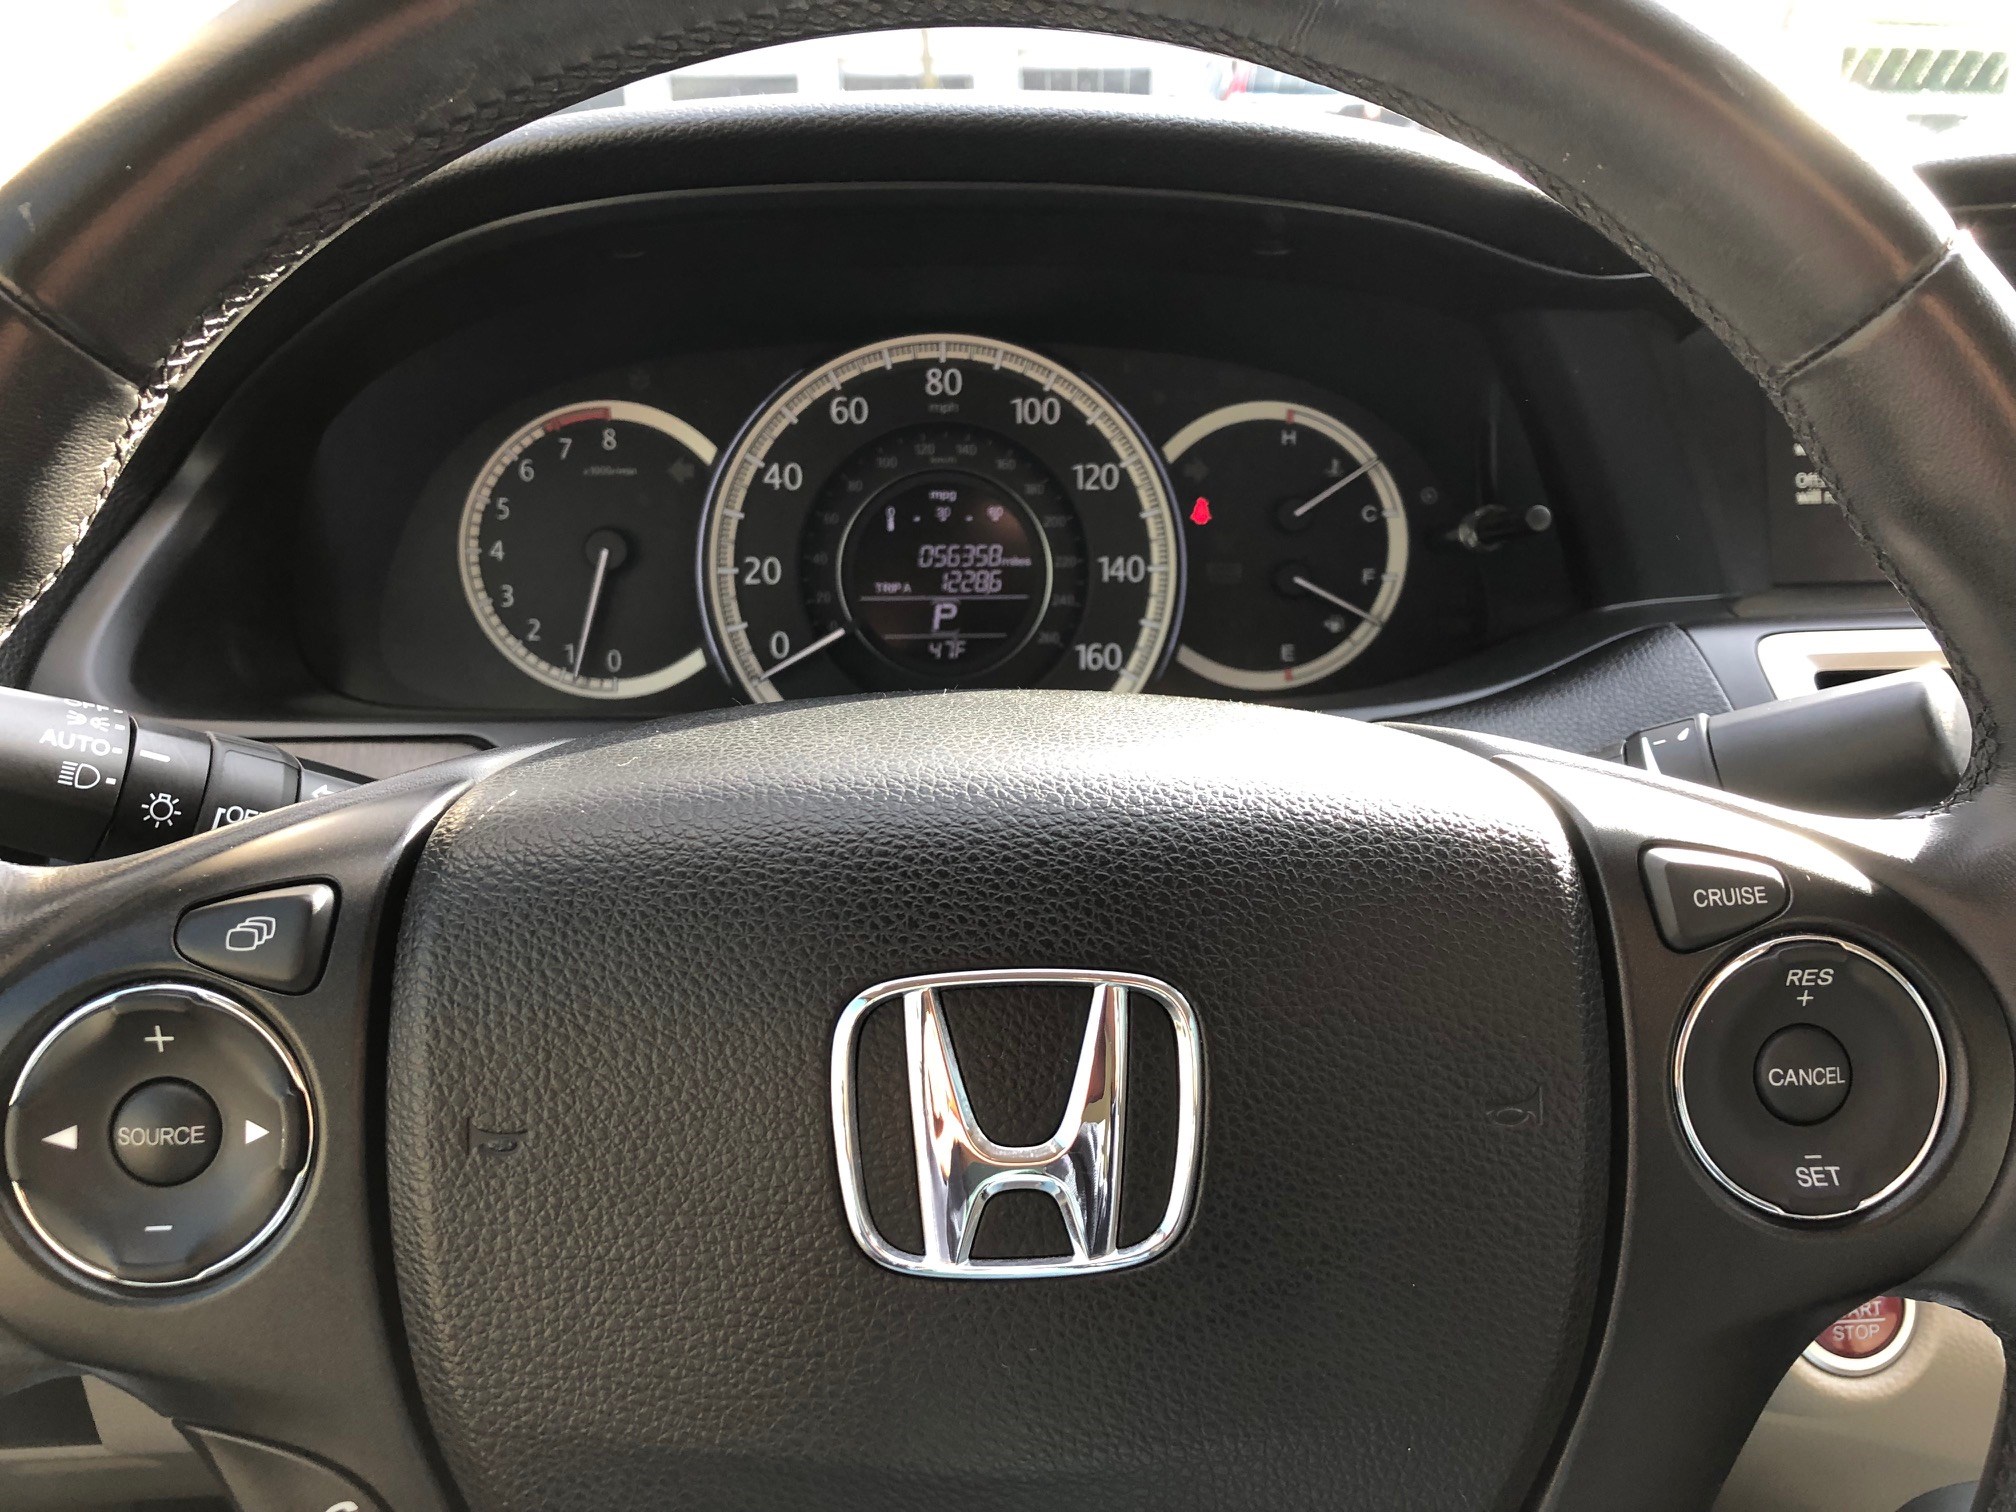 Excellent Condition Honda Accord Sedan V6 Engine With